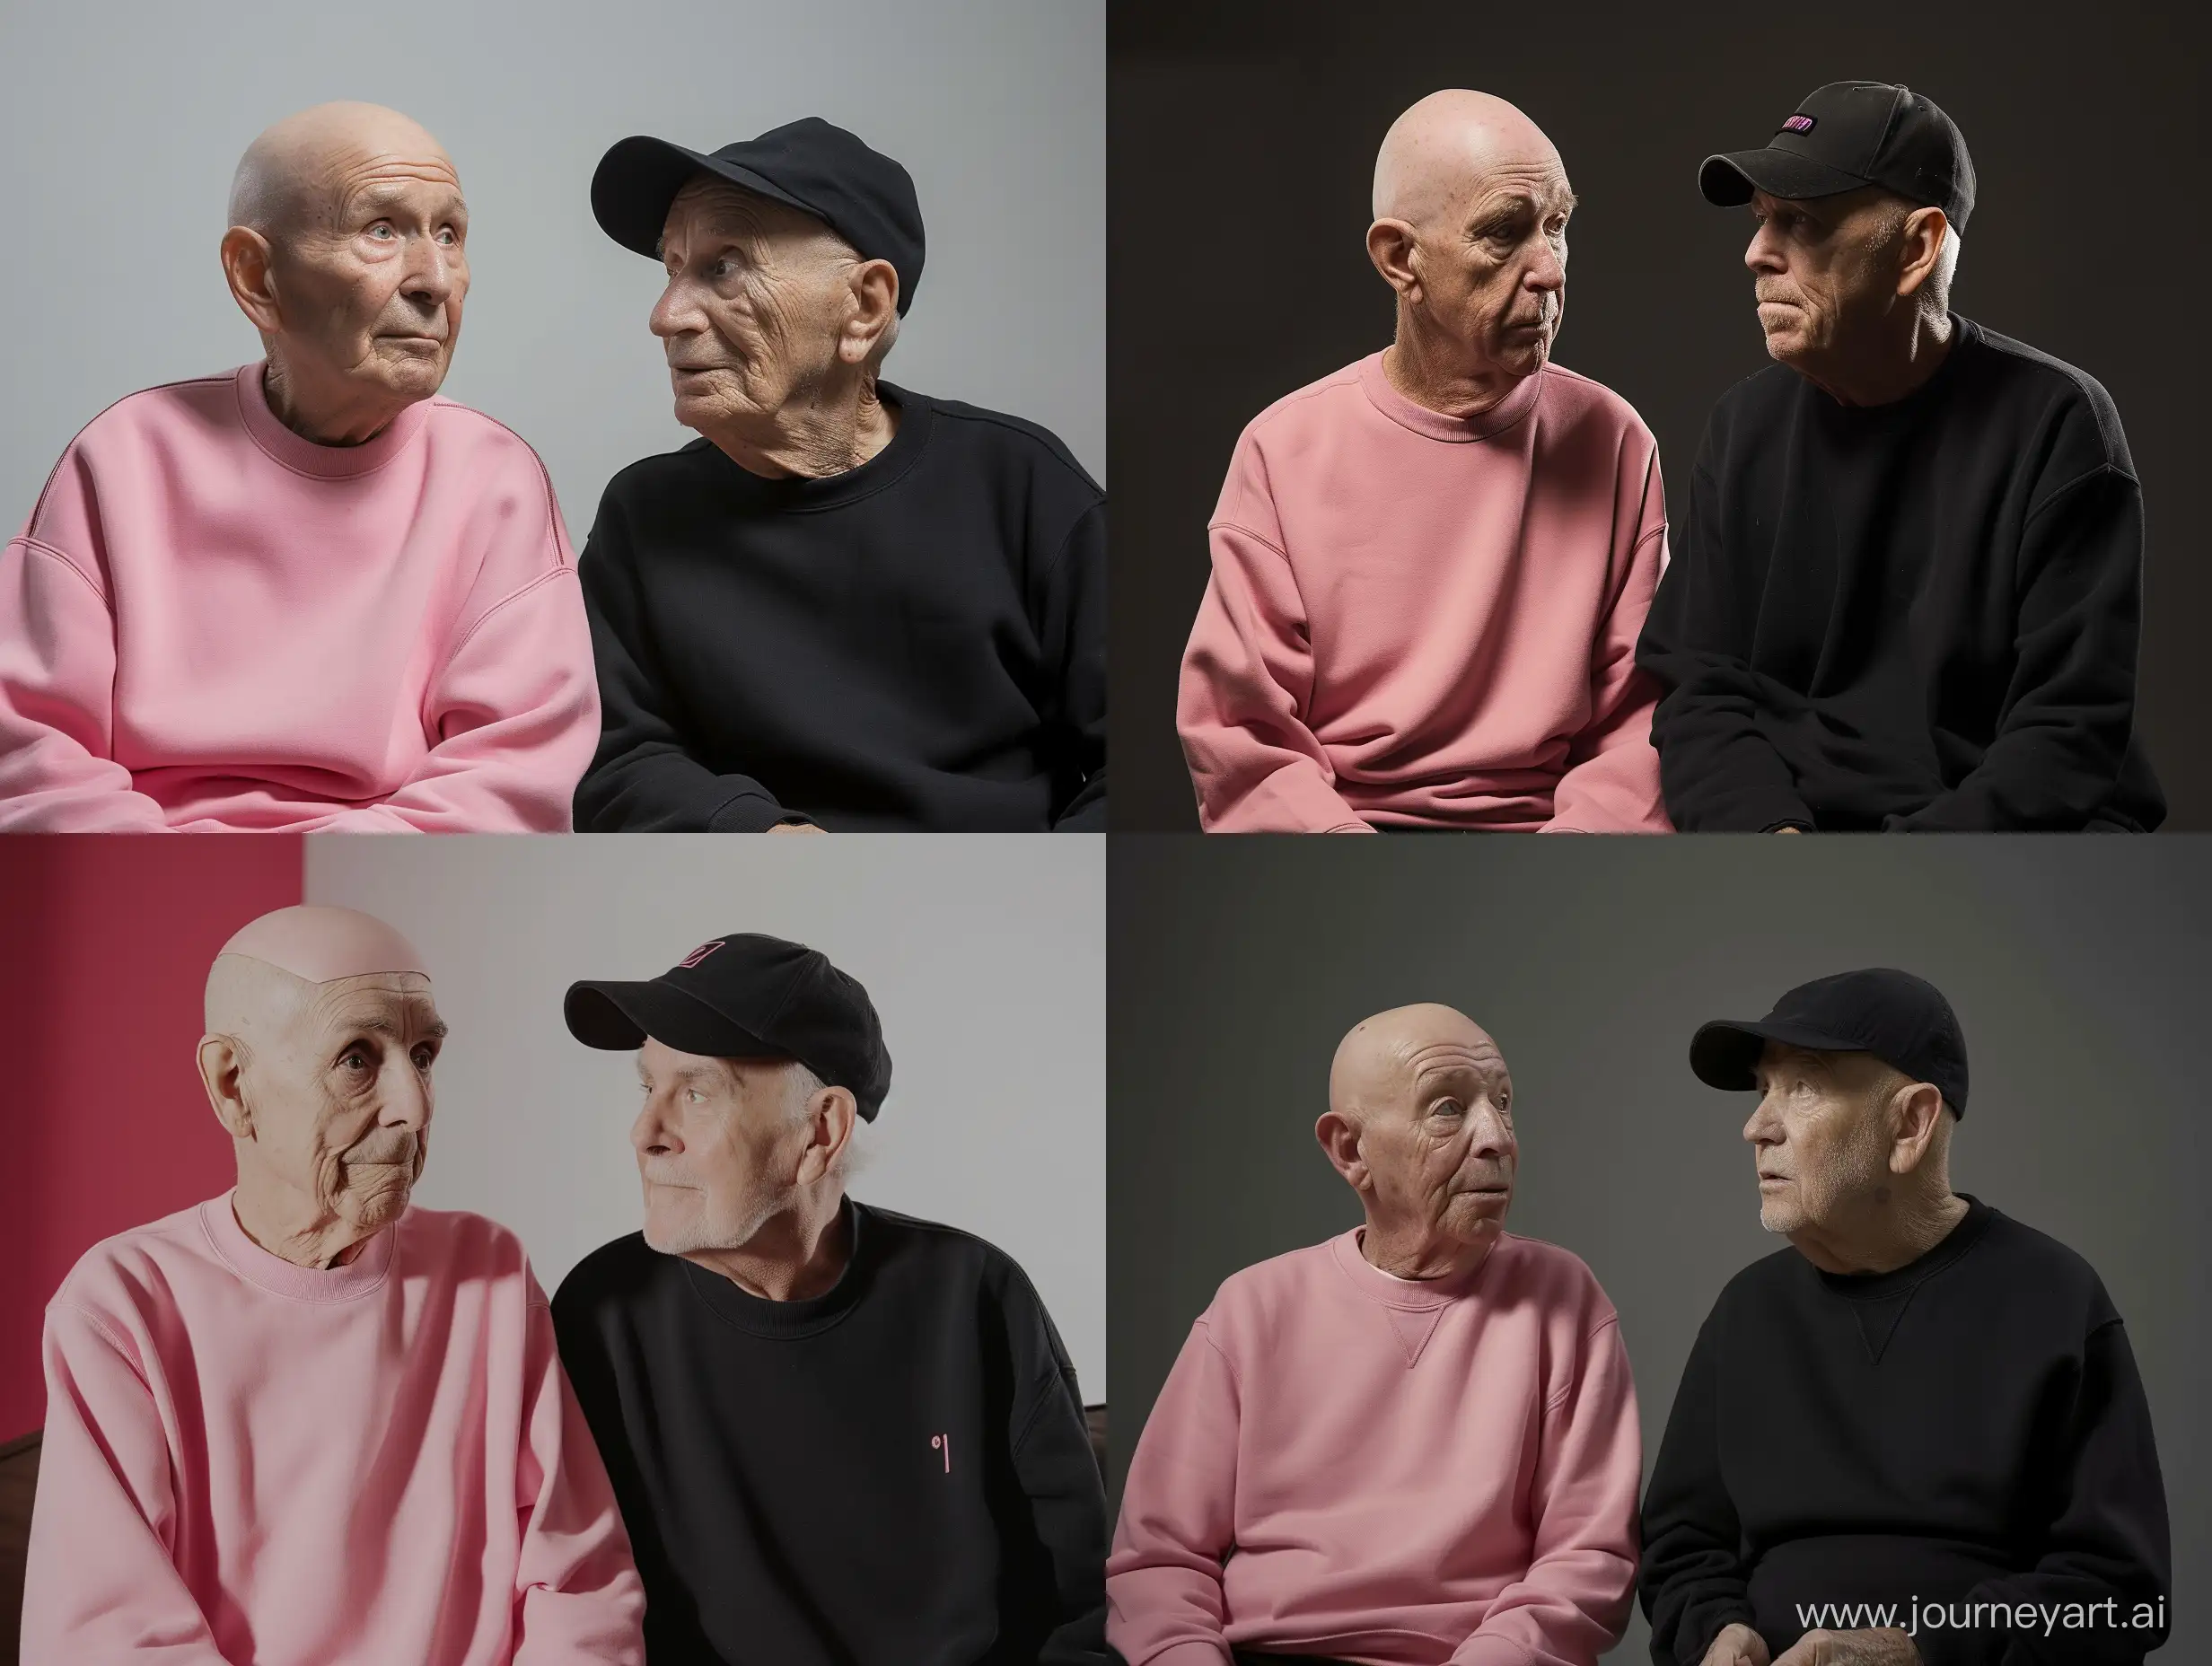 one old bald man wearing a pink sweatshirt with a blank head without any hat on it and another old bald man wearing a black sweatshirt has a baseball cap on his head sitting and discussing retro games, hi-tech background